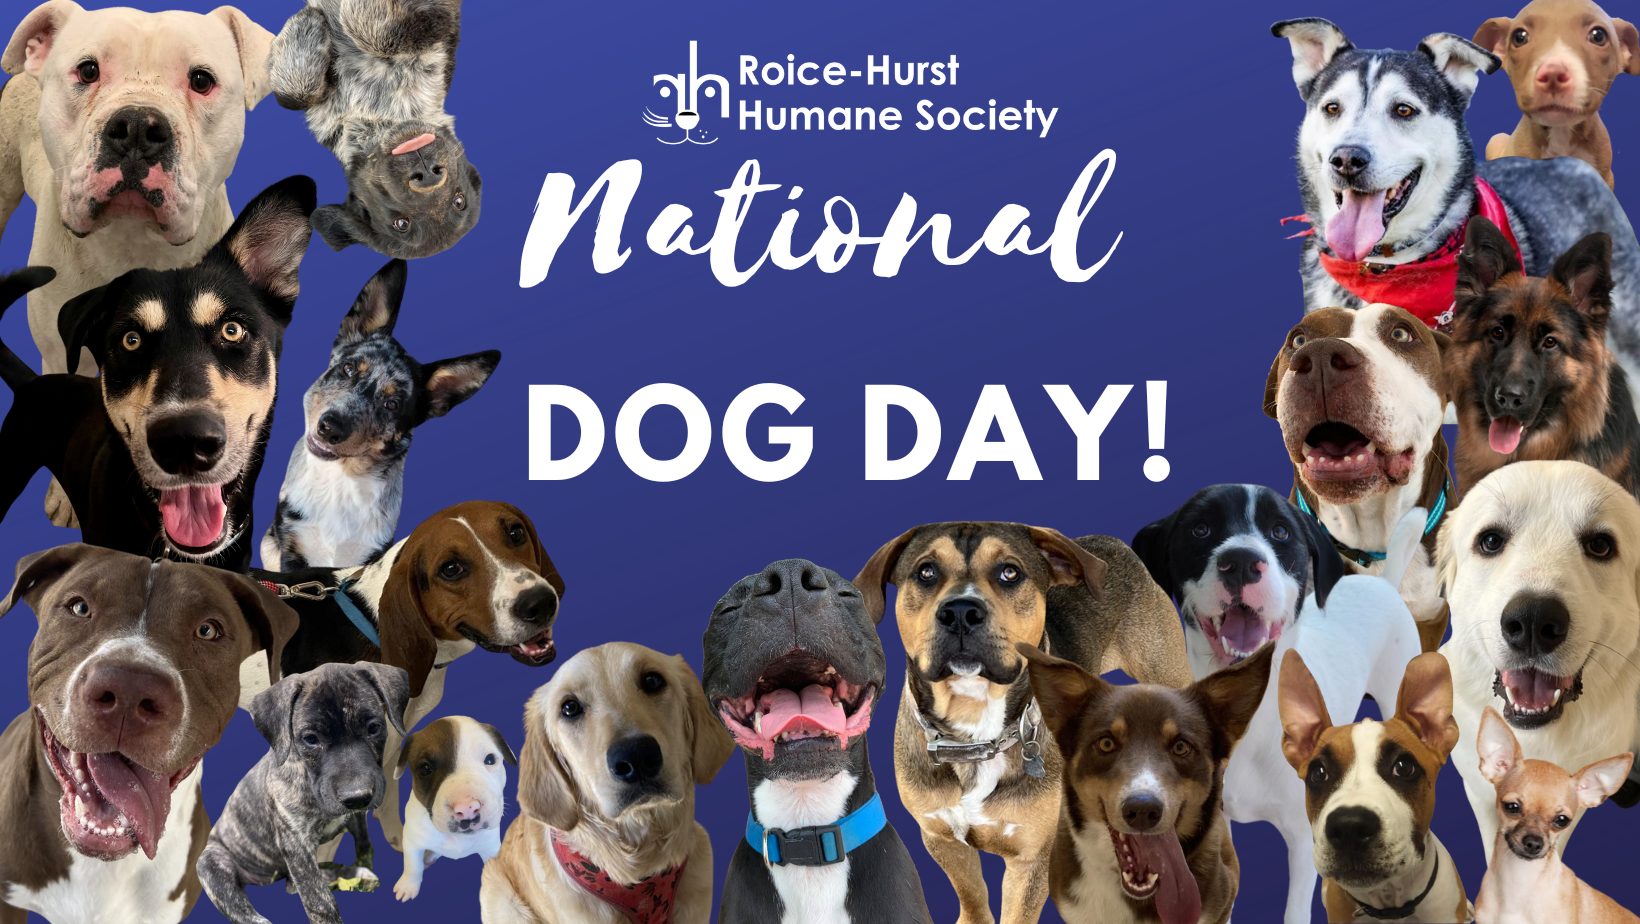 August 26 is National Dog Day!